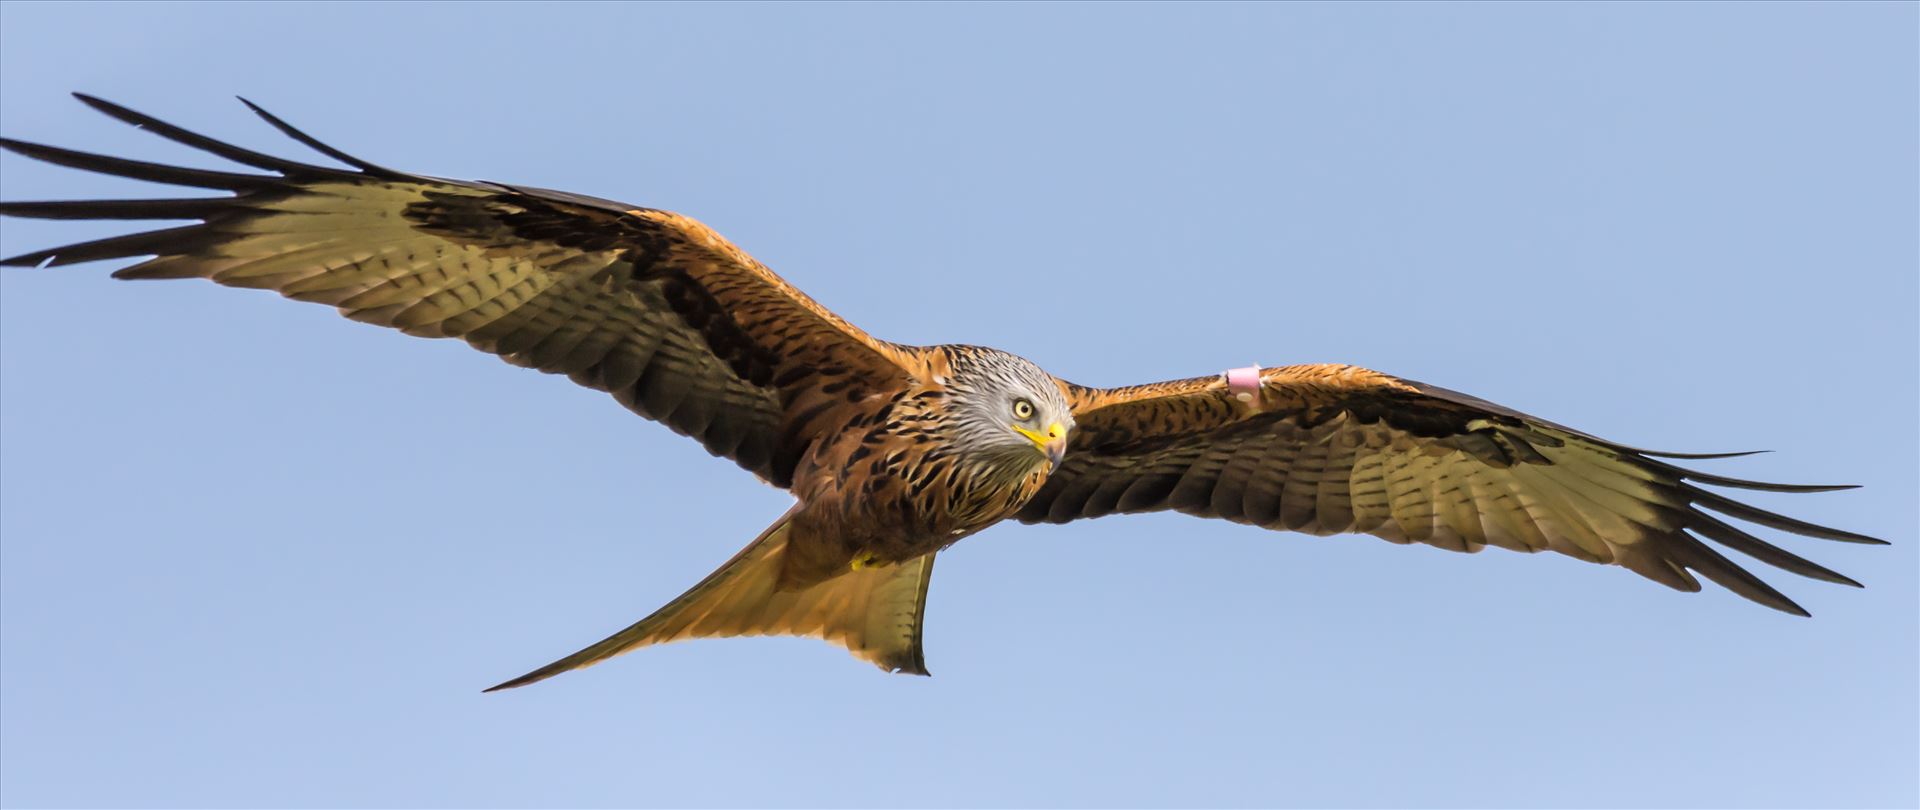 Red Kite - The red kite is a medium-large bird of prey which was hunted to extinction in the 1870s but later reintroduced 1989–1992 & are now gaining in numbers thanks to breeding programmes throughout the UK. by philreay